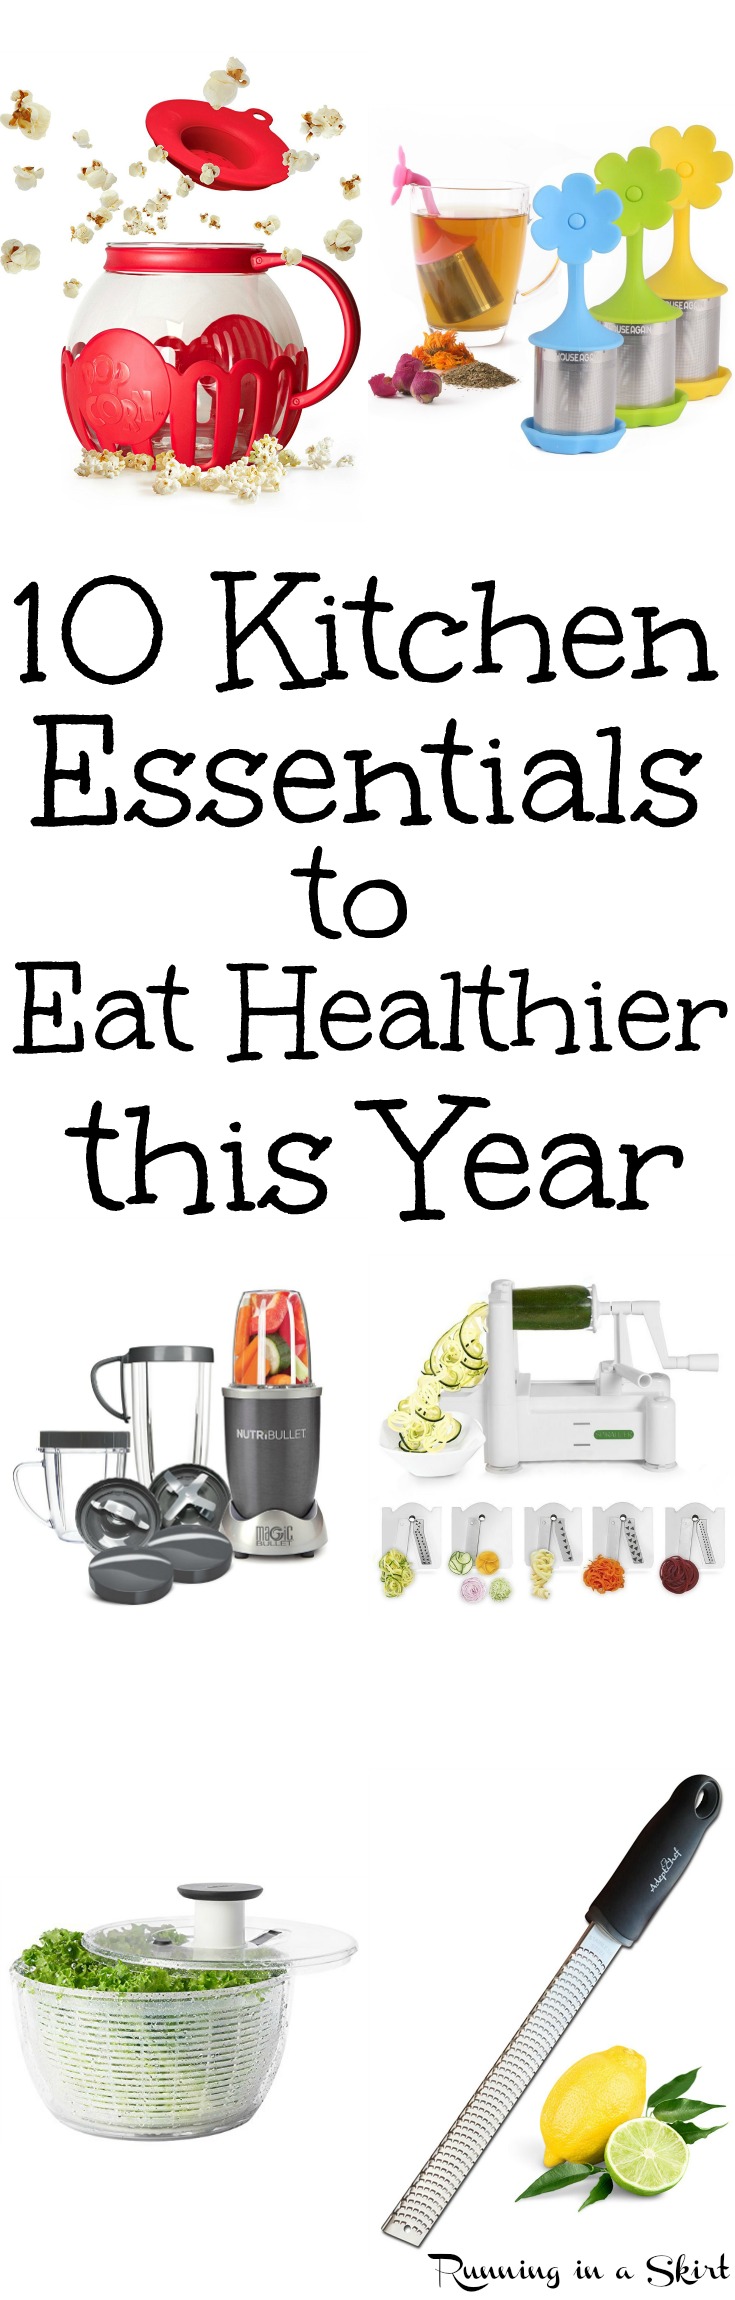 10 Healthy Kitchen Gadgets and Tools to Eat Healthier for Life.  These run ideas and products can make cooking easier and better for your health.  Great home tools for clean eating, cooking veggies, vegetable noodles for low carb diets and following recipe ideas. / Running in a Skirt via @juliewunder